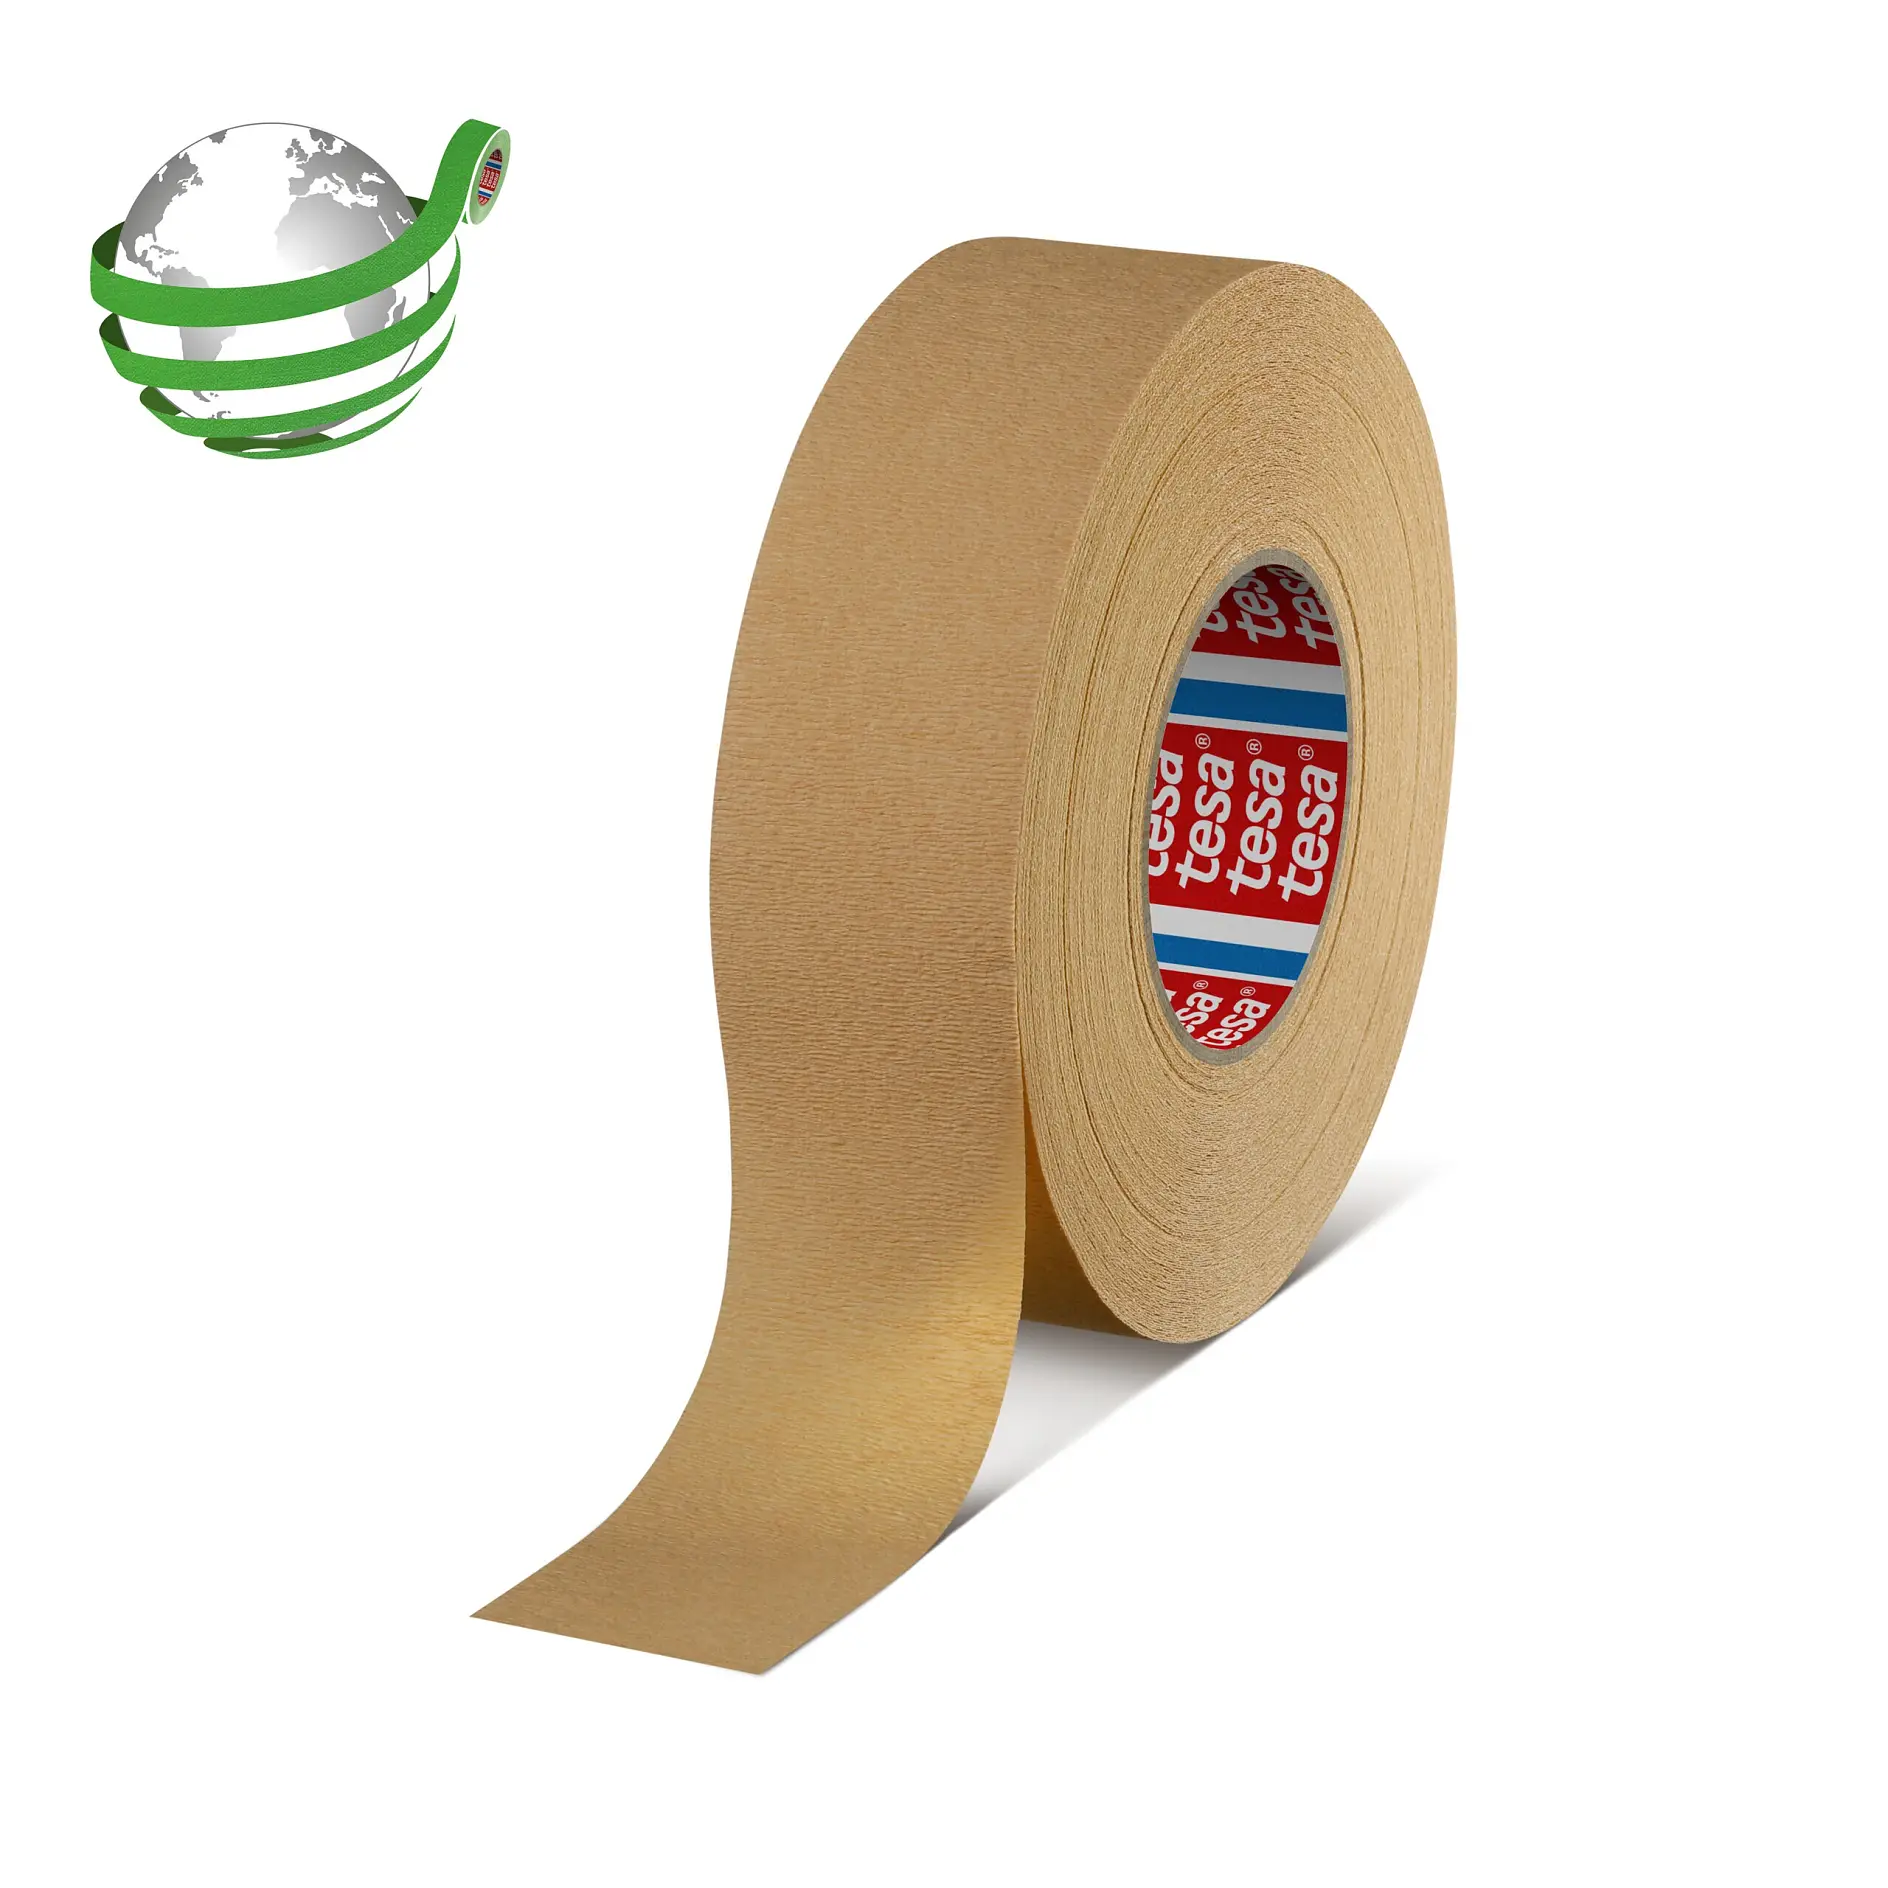 tesa-4319-flexible-masking-tape-for-paint-work-curves-brown-043190001200-pr-with-marker